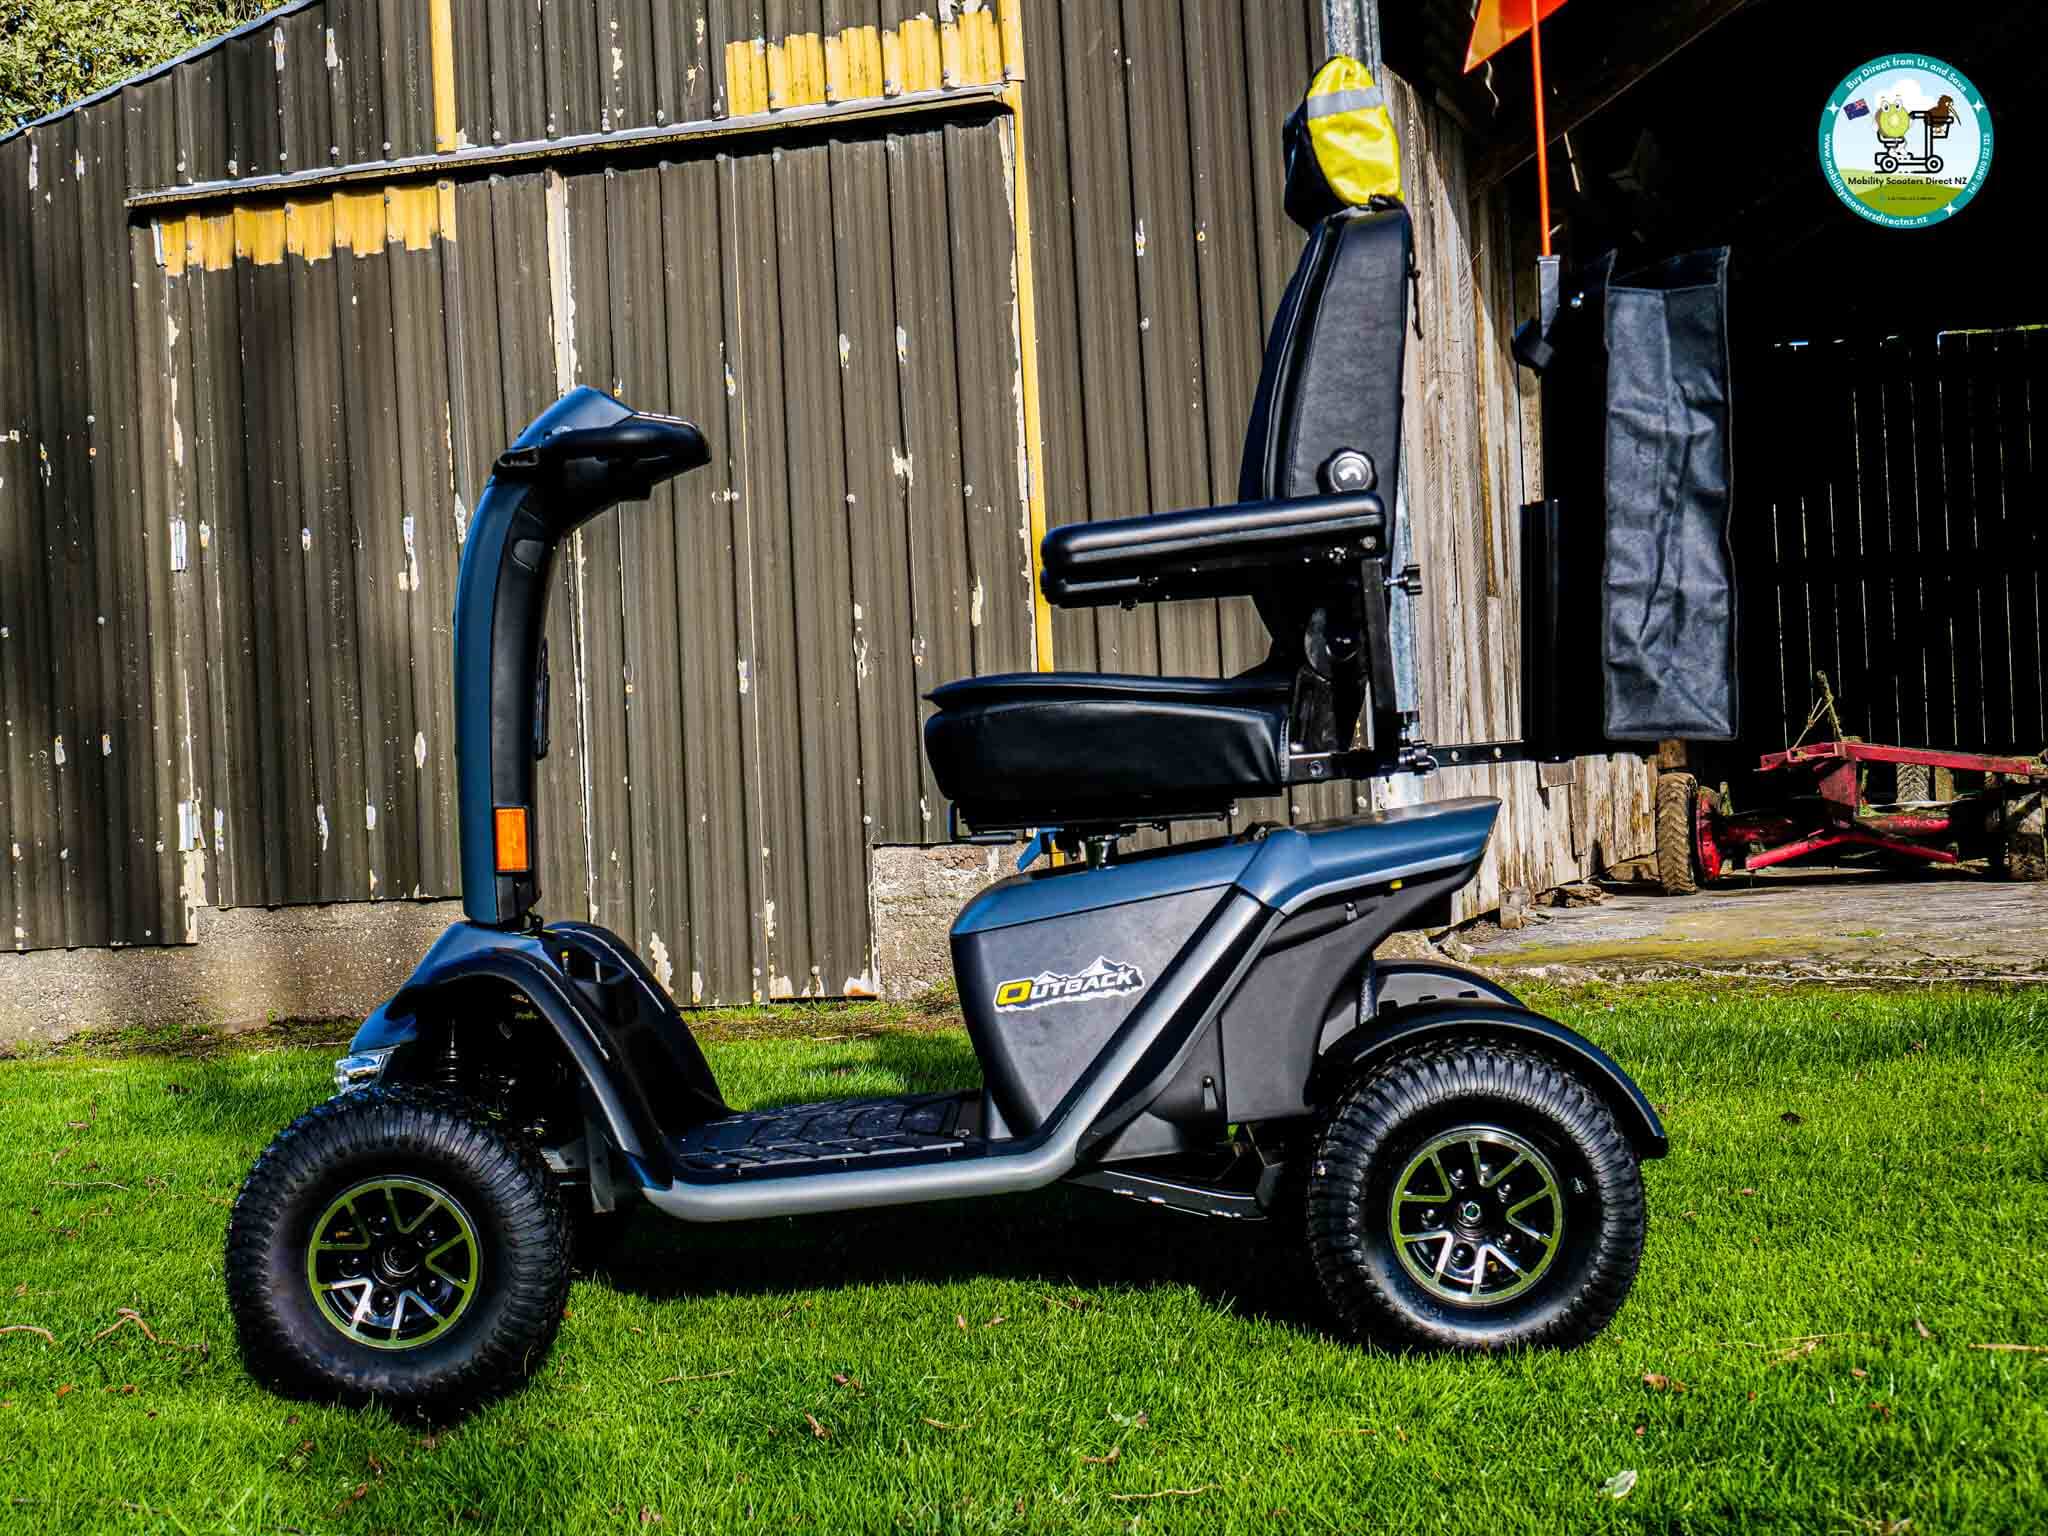 Pride Outback Mobility Scooter